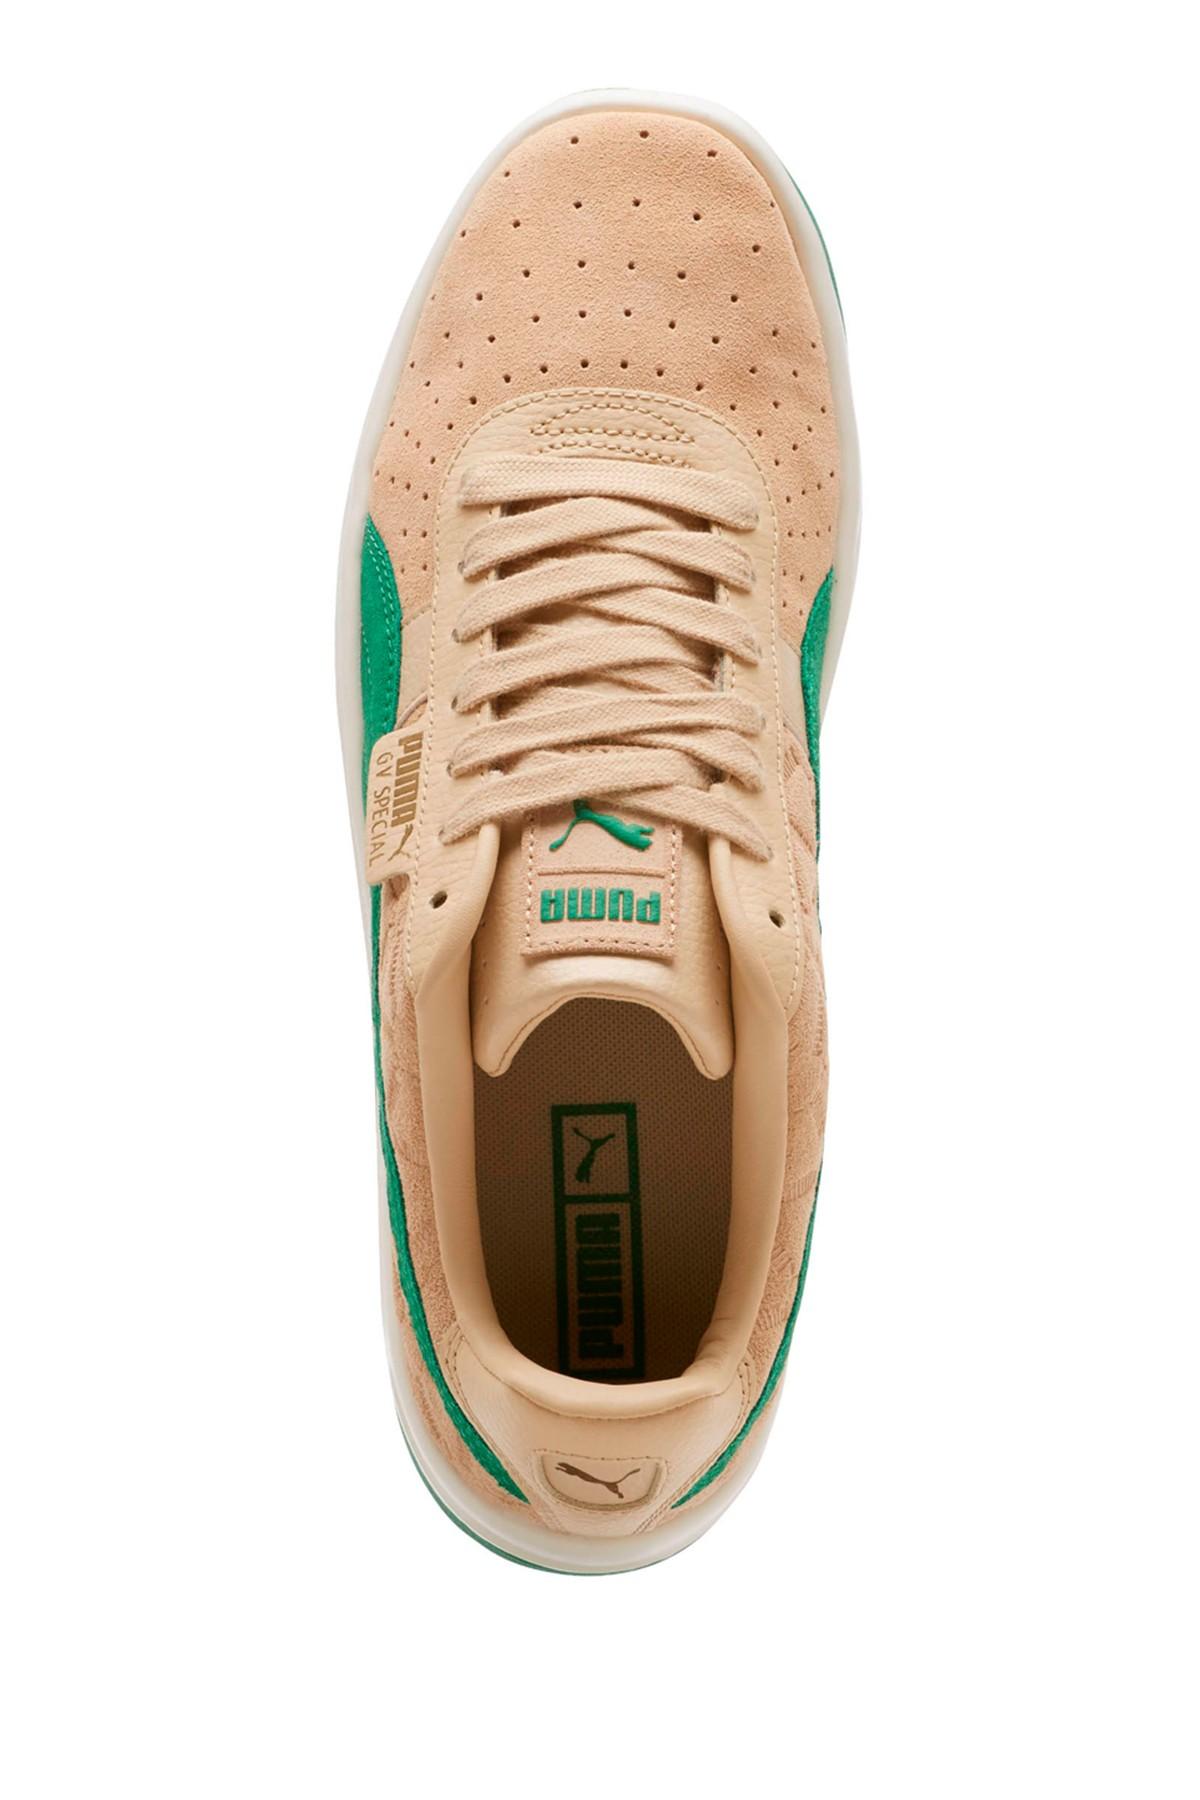 PUMA Suede Gv Special Lux Sneakers in Beige (Green) for Men - Lyst